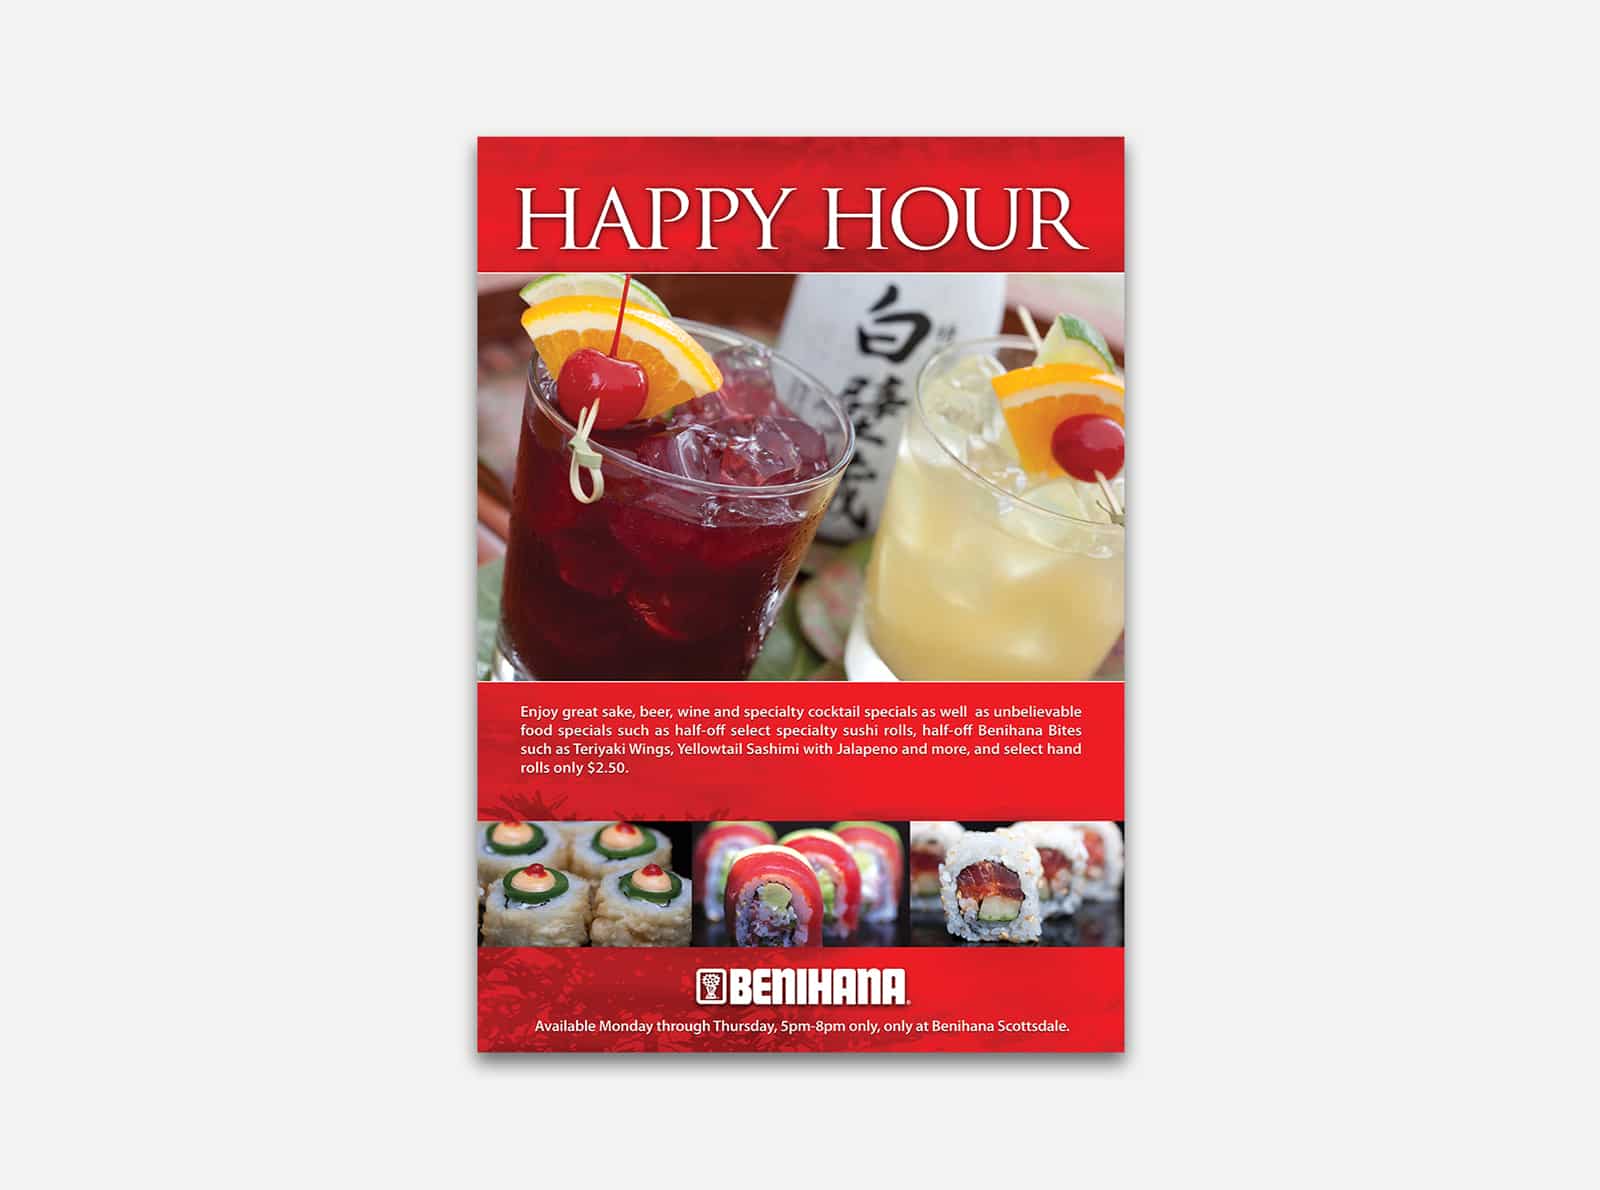 Benihana's restaurant graphic design for email marketing campaign featuring happy hour drinks promotion against grey backdrop.